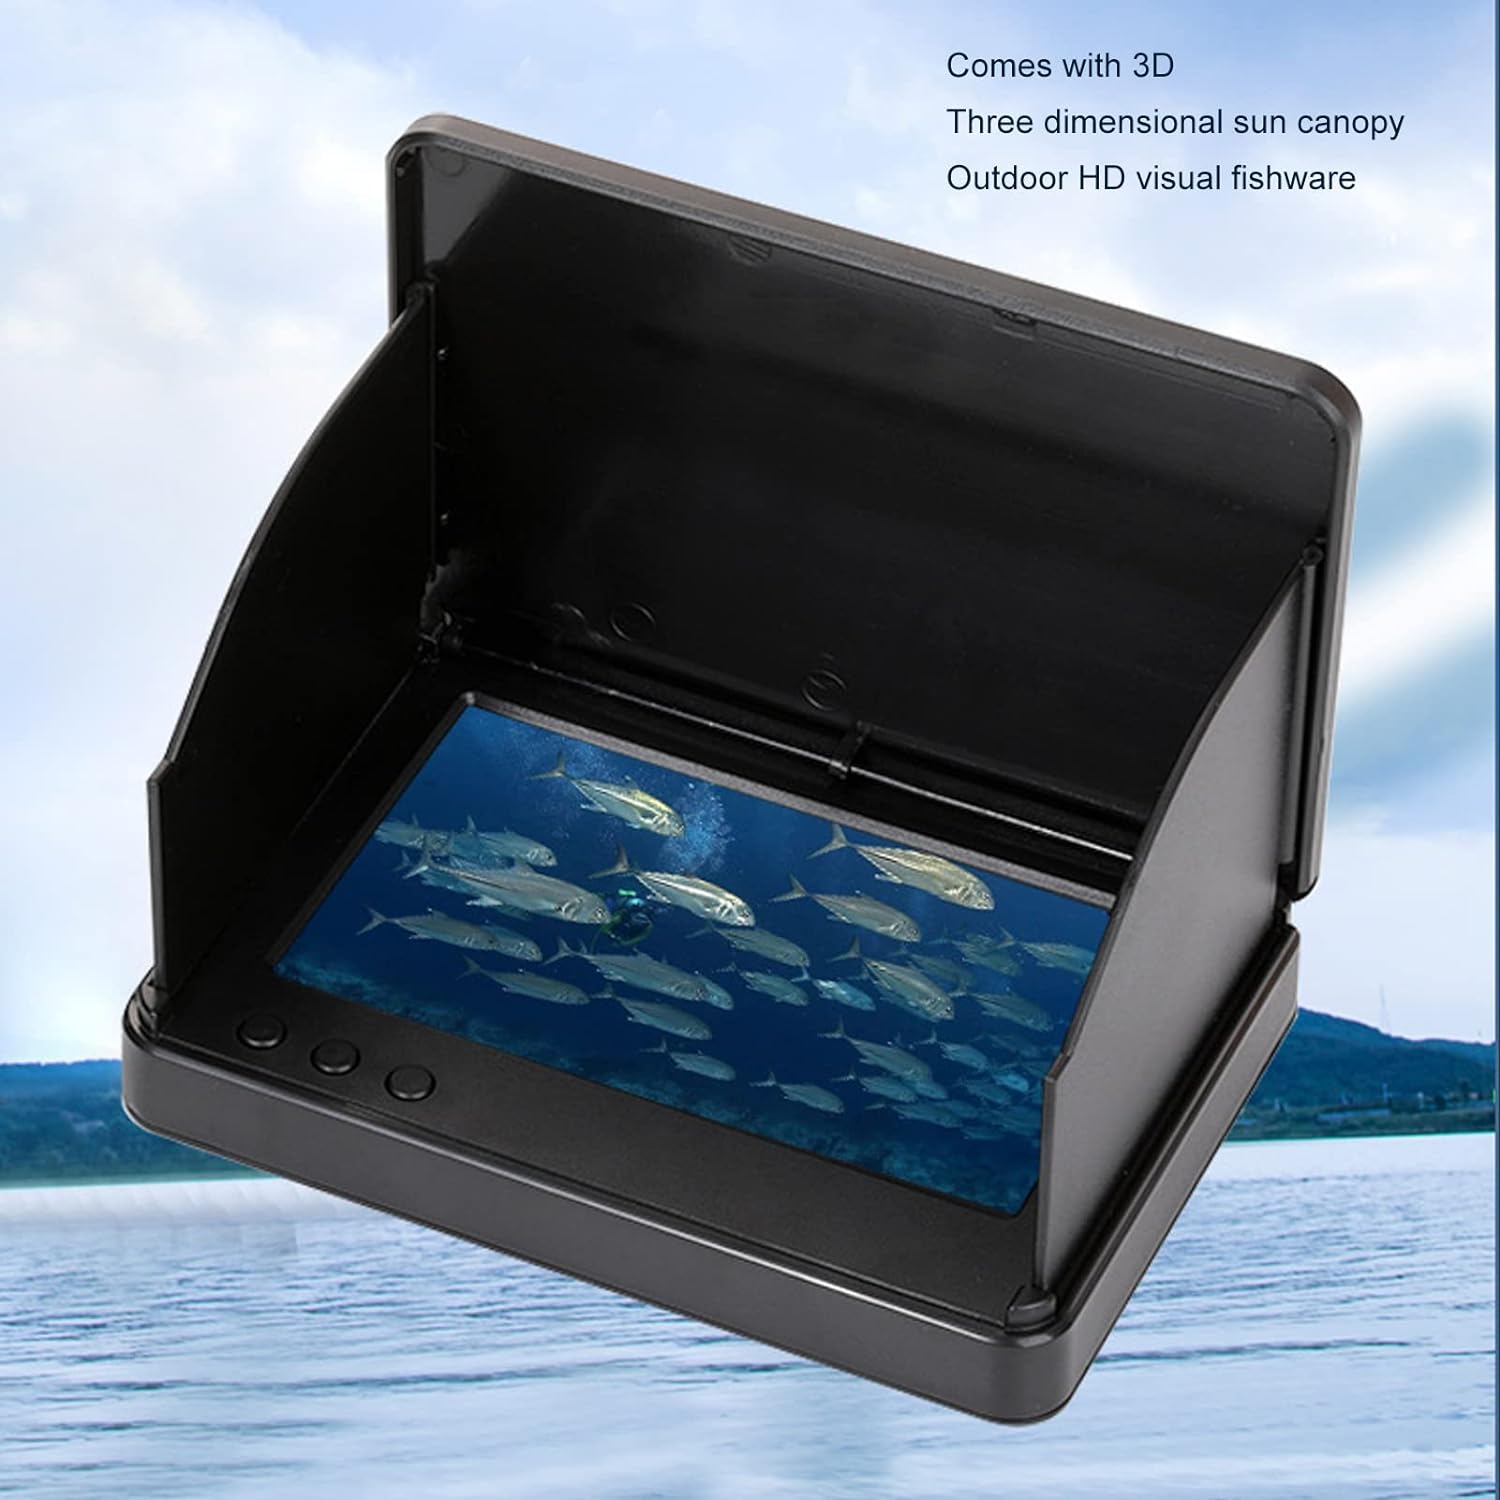 Fish Finder, Portable Fish Depth Finder 4.3inch IPS HD Screen Underwater Fish Finder Camera 10,000mAh for Boat Fishing Sea Fishing Ice Fishing (4.3inch 20m/65.6ft Tensile Fishing Line)